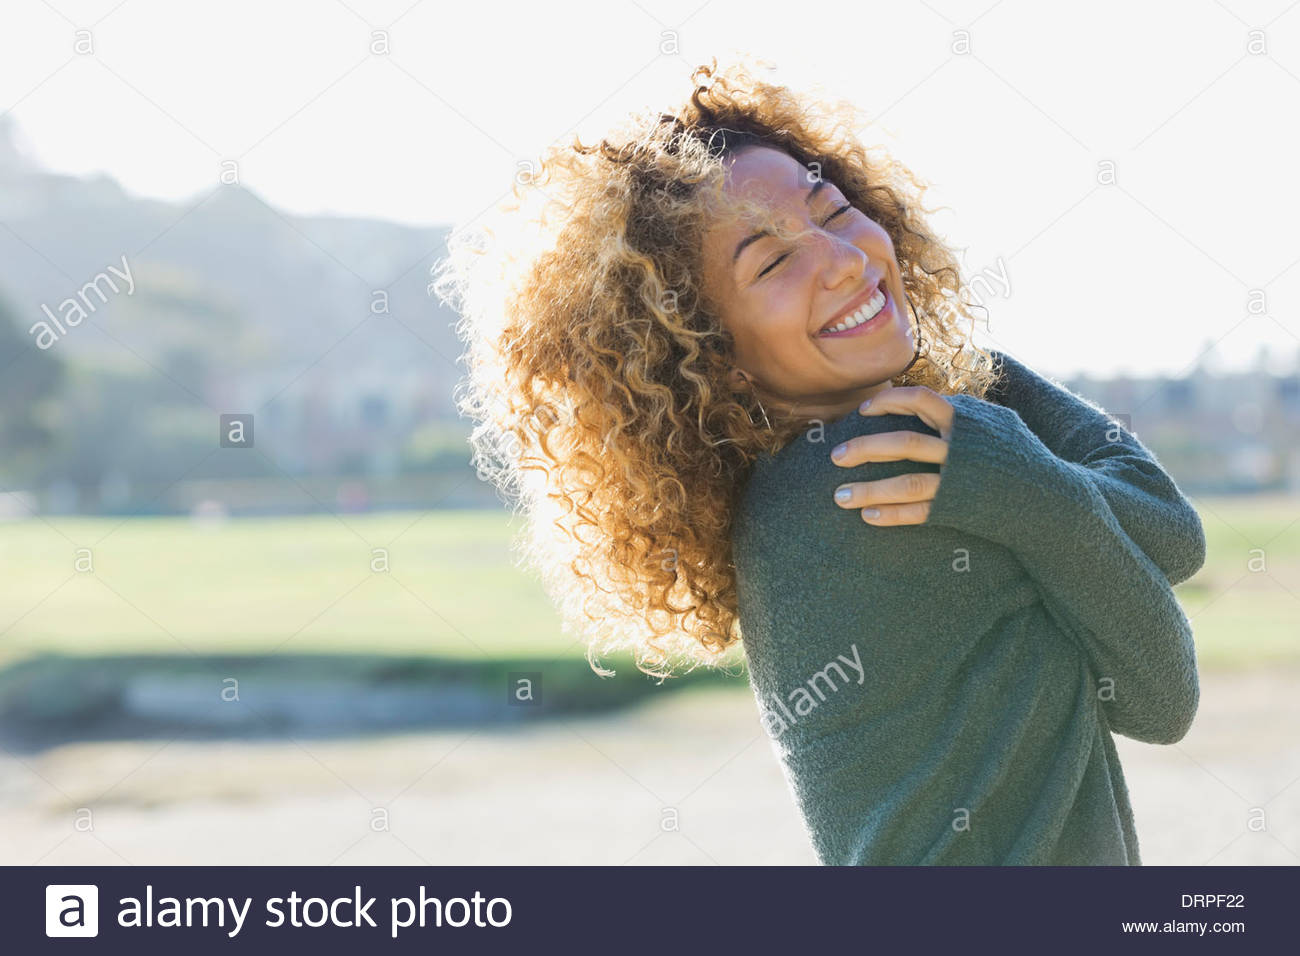 Smiling woman with eyes closed outdoors Stock Photo